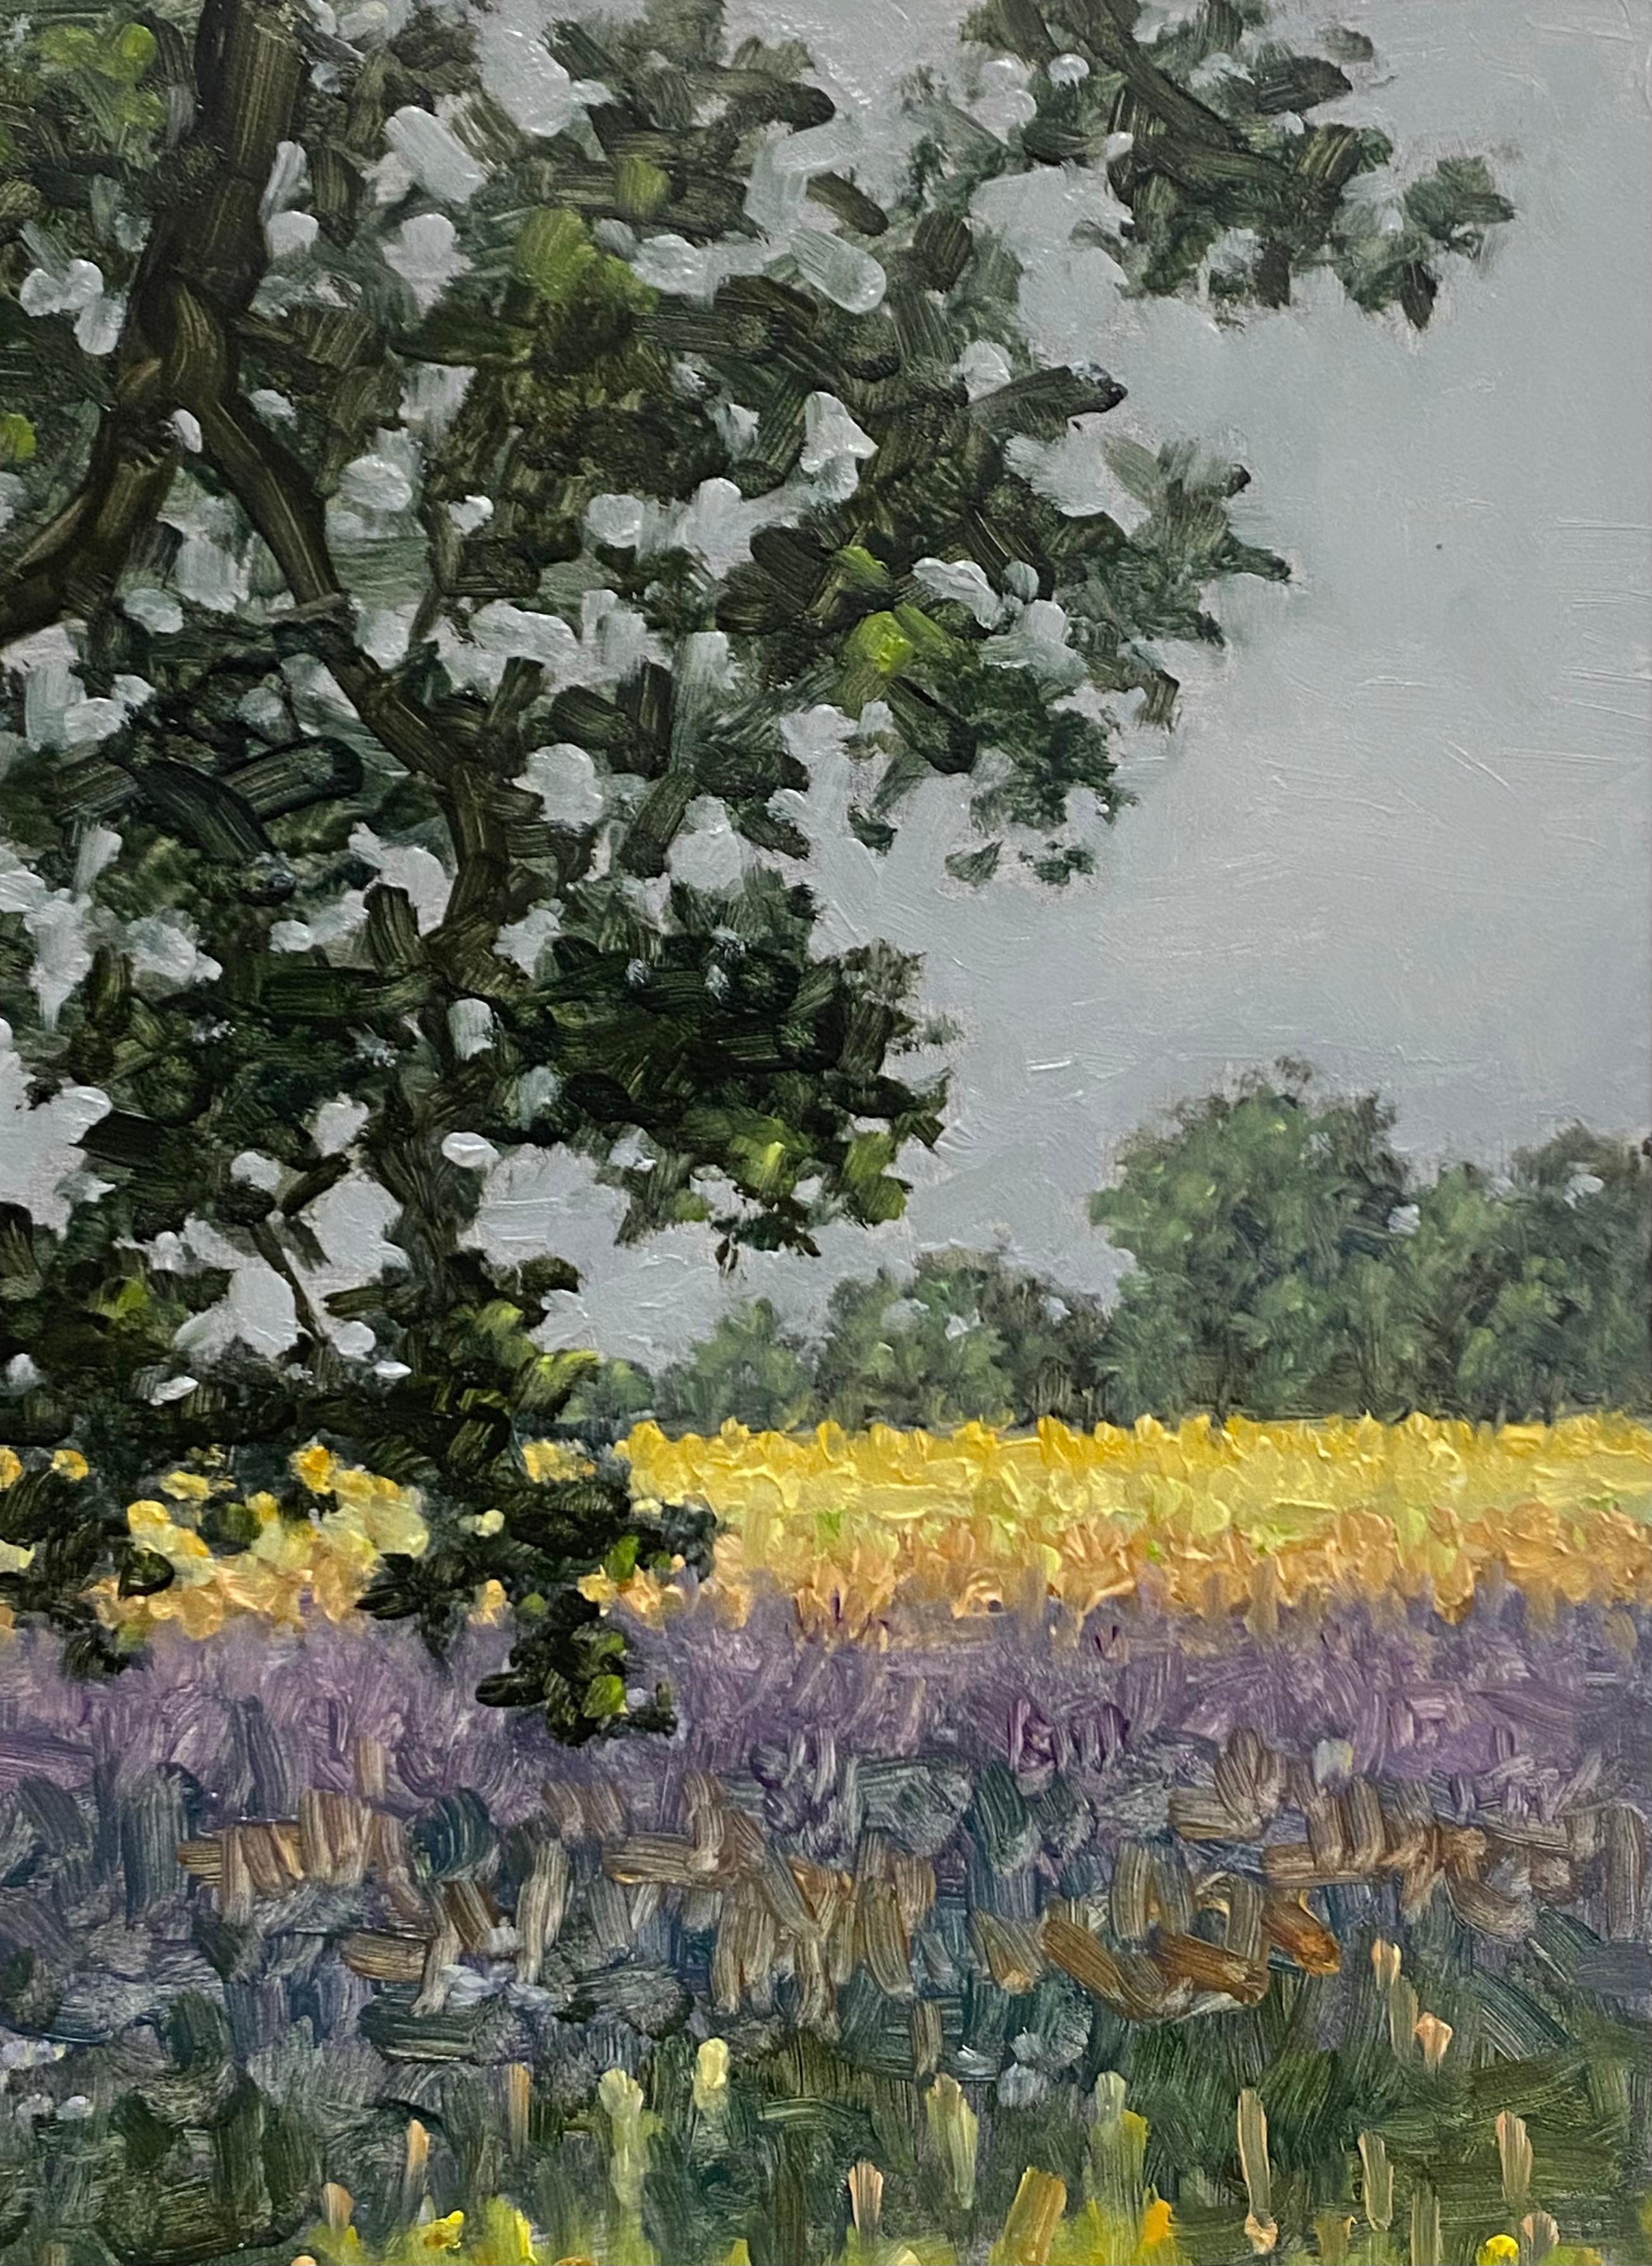 A peaceful outdoor scene with a delicately painted field with purple lavender flowers beneath a tree with dark green leaves, beautifully capturing the idyllic feel of a field of wildflowers and tall grass in late June. Signed, dated and titled on